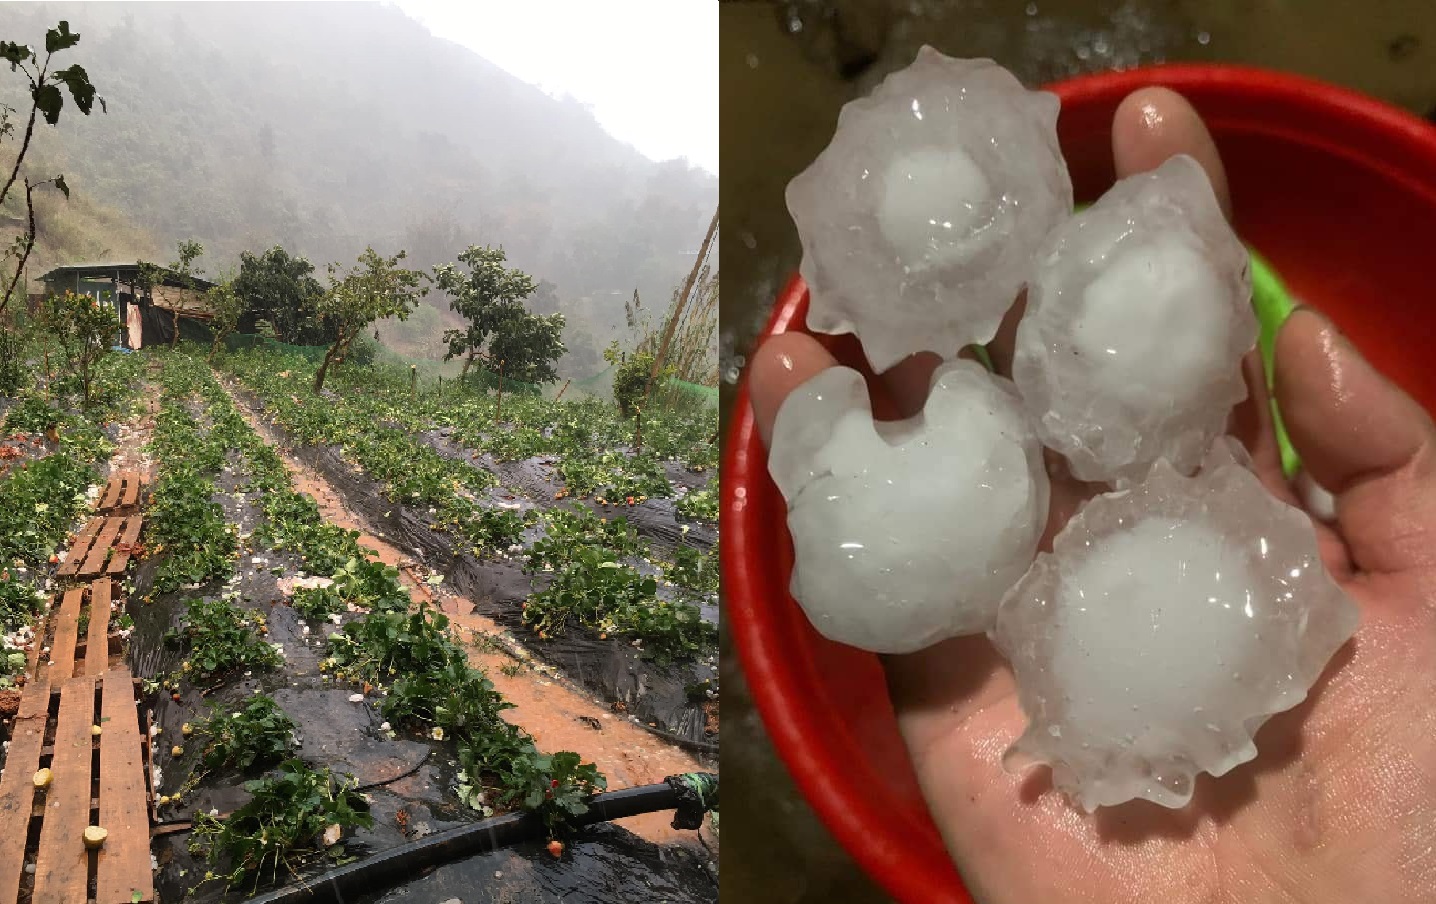 Hailstones as big as an egg are seen in this photo provided by a local resident.